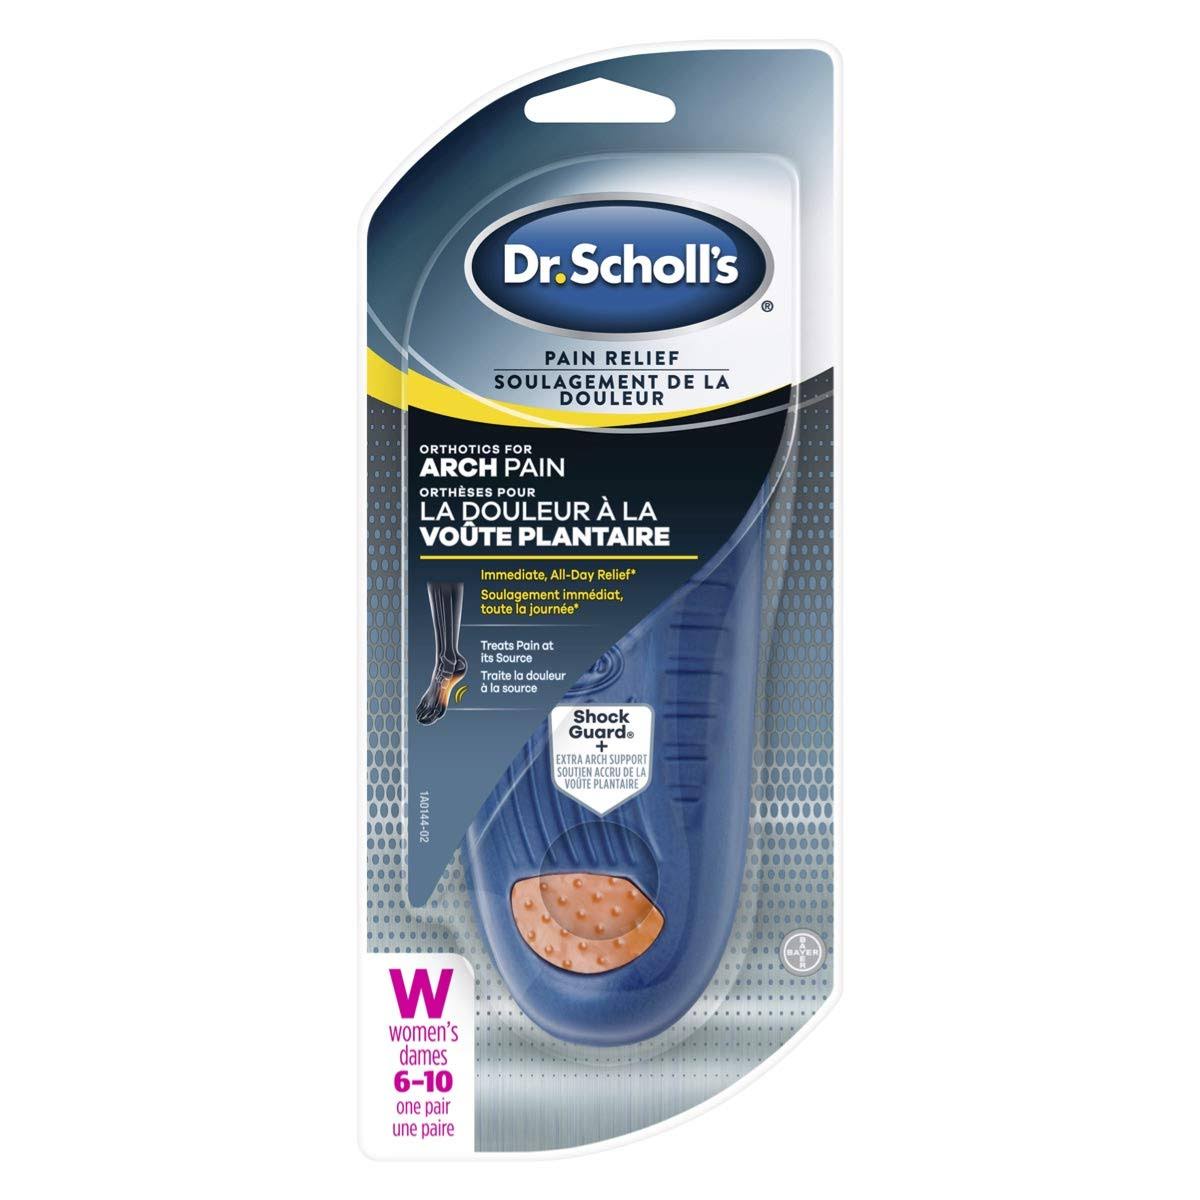 Dr. Scholl's Pain Relief Orthotics for Women's Arch Pain